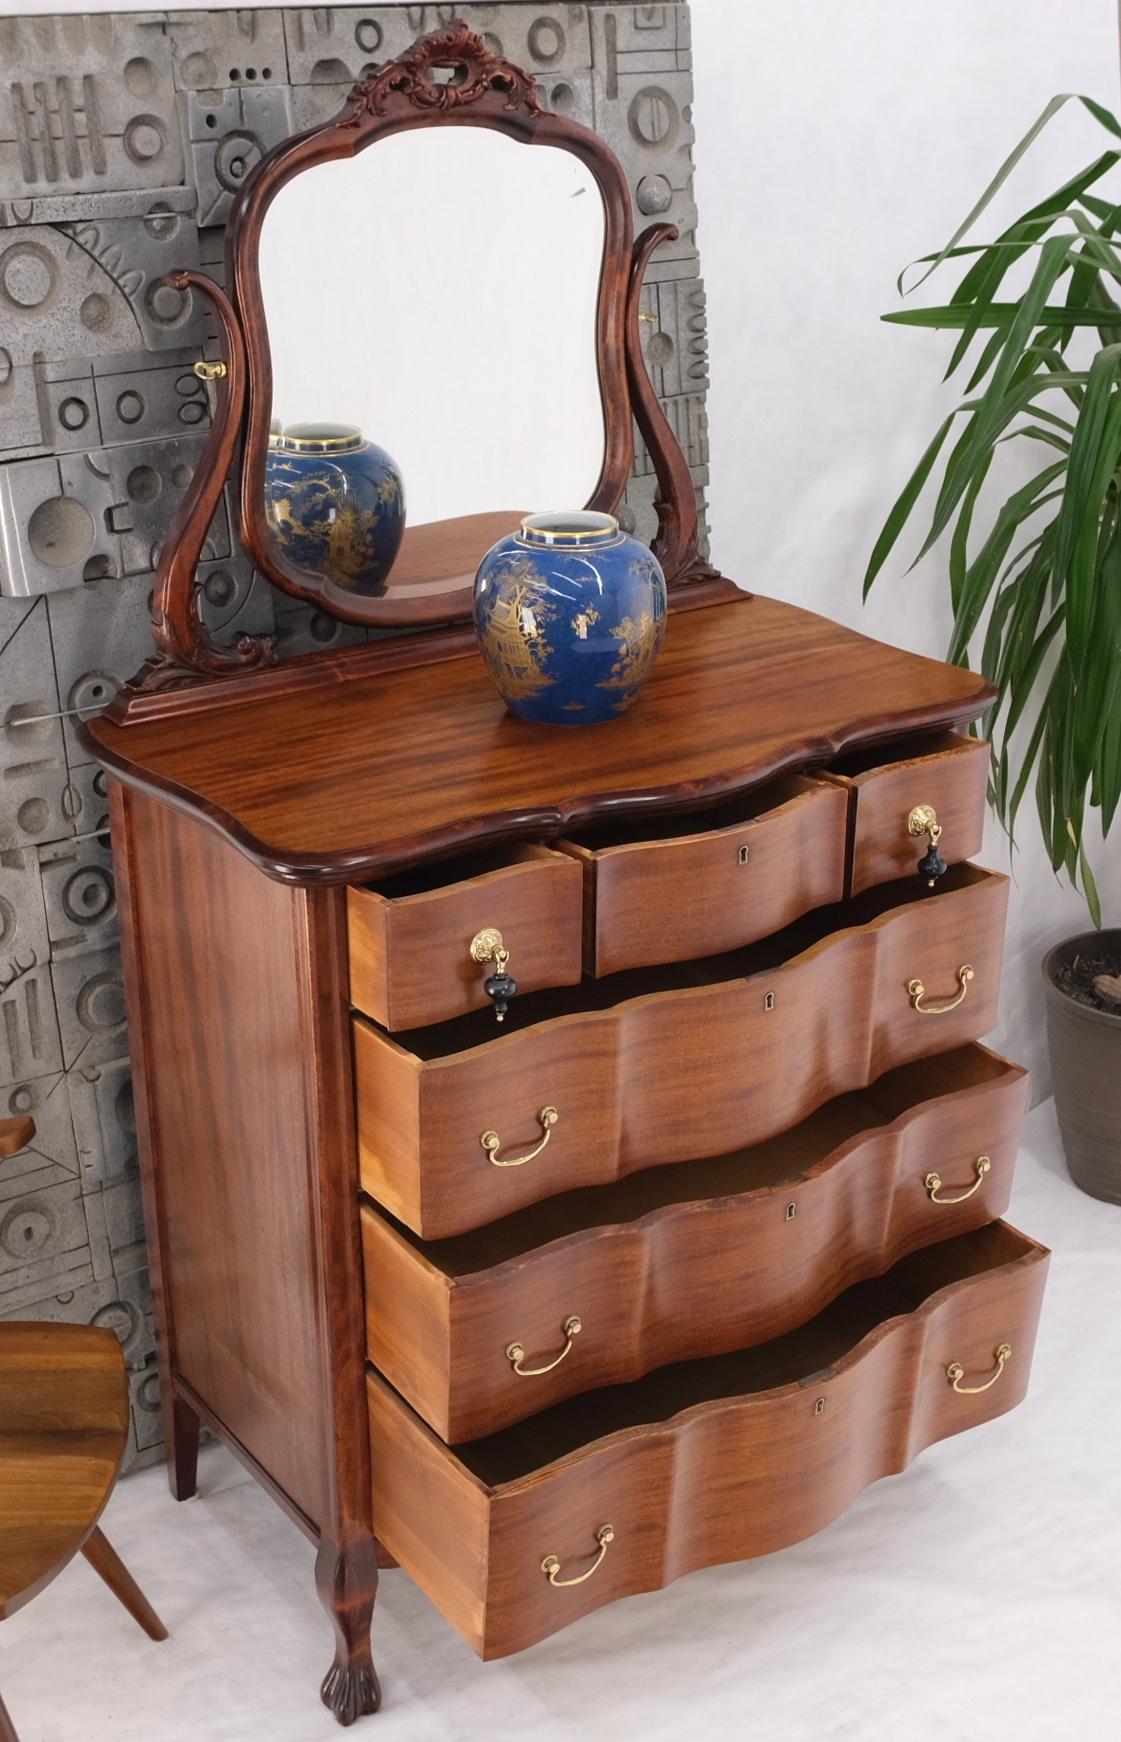 Serpentine front 4 drawers swivel mirror mahogany dresser high chest ball claw
No key included, top most lock is non-functional.